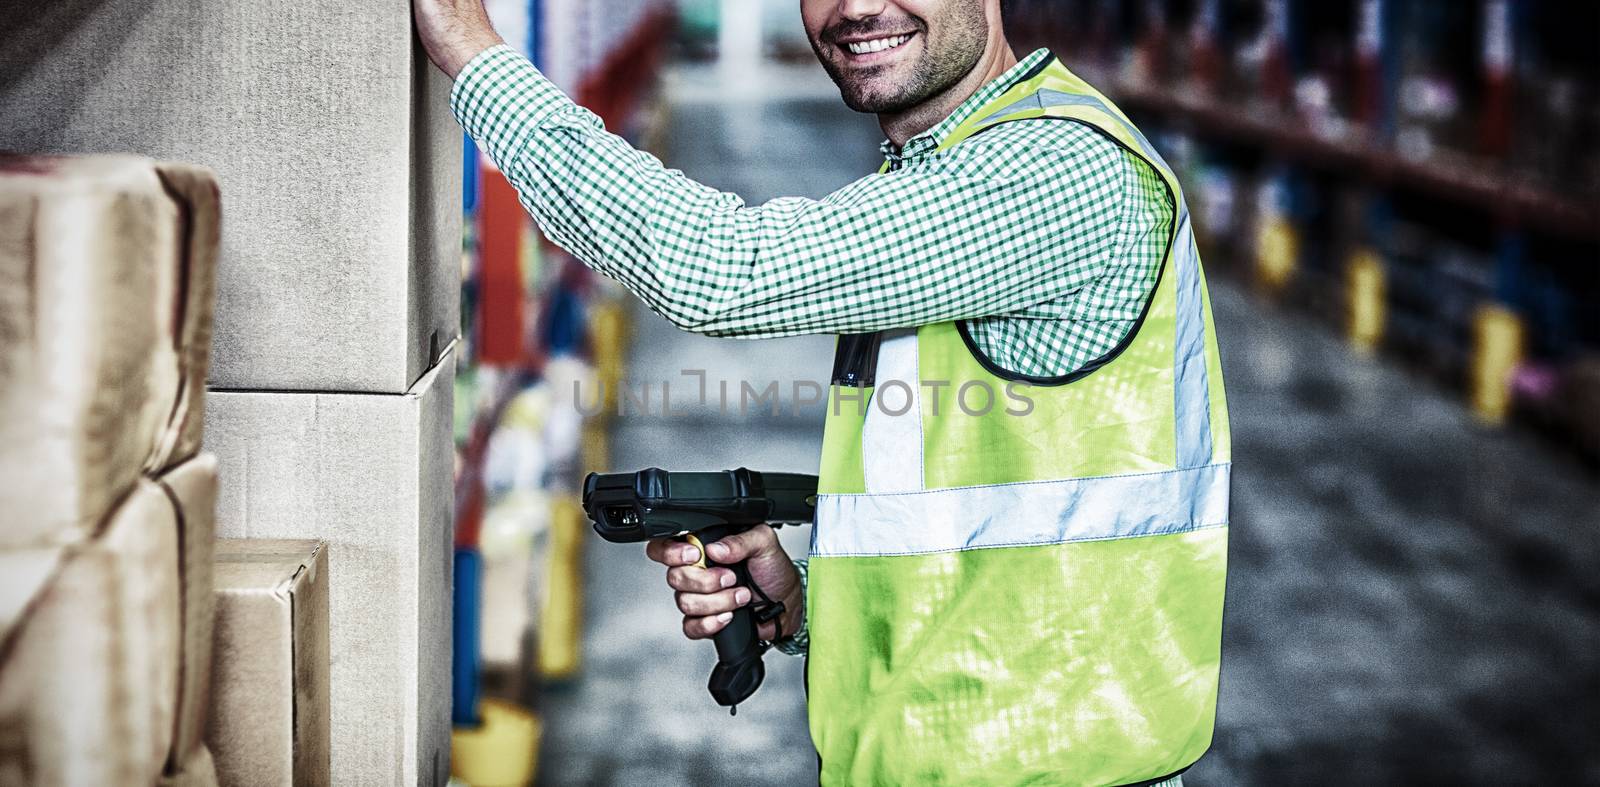 Worker is smiling and posing during work by Wavebreakmedia